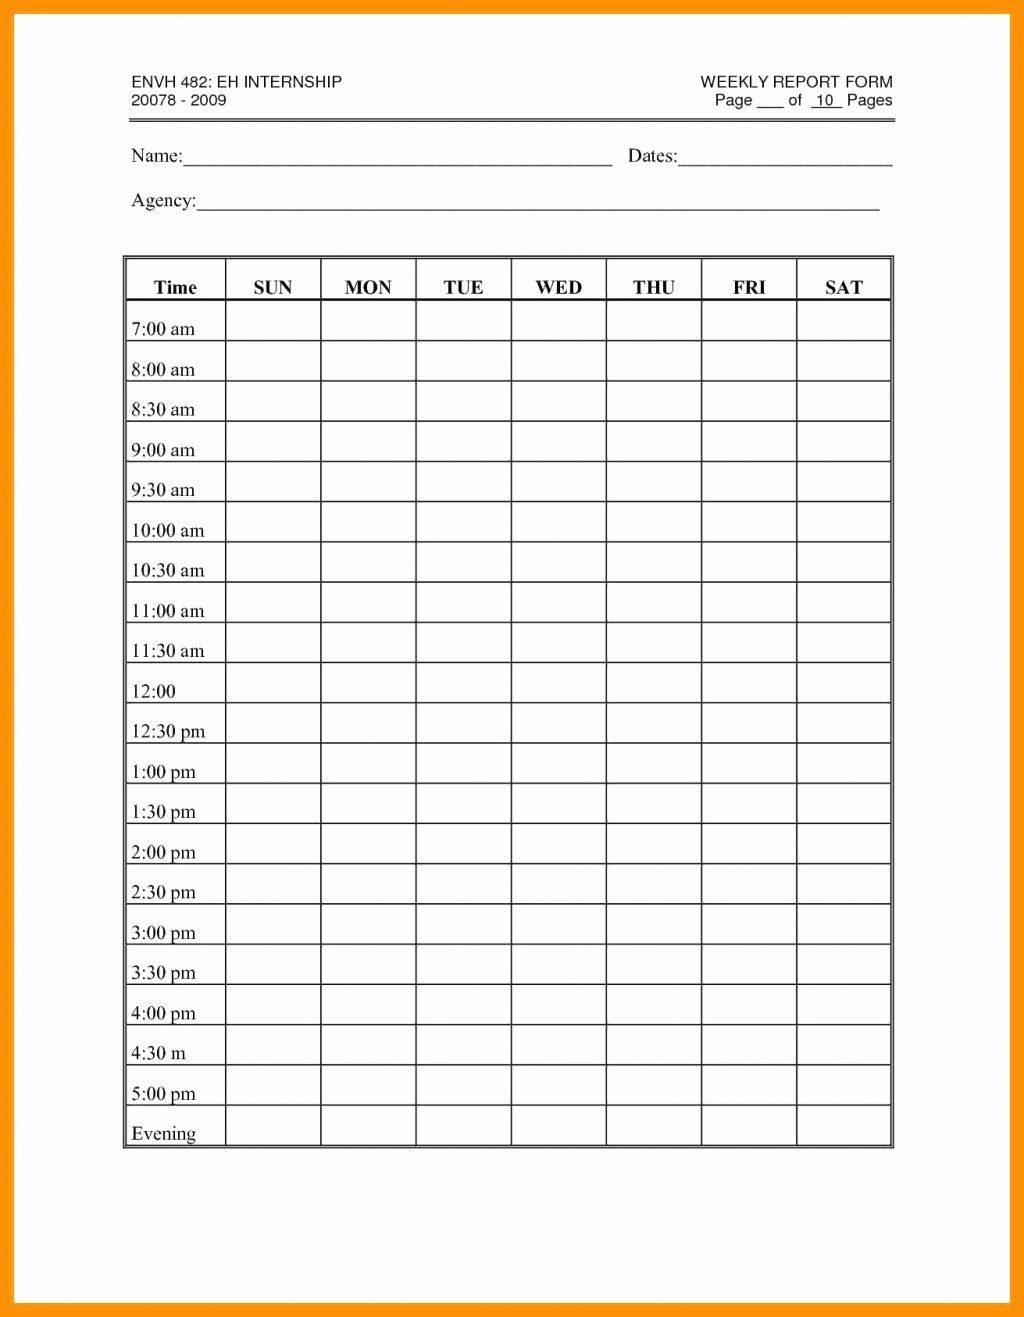 group weight loss competition tracker excel